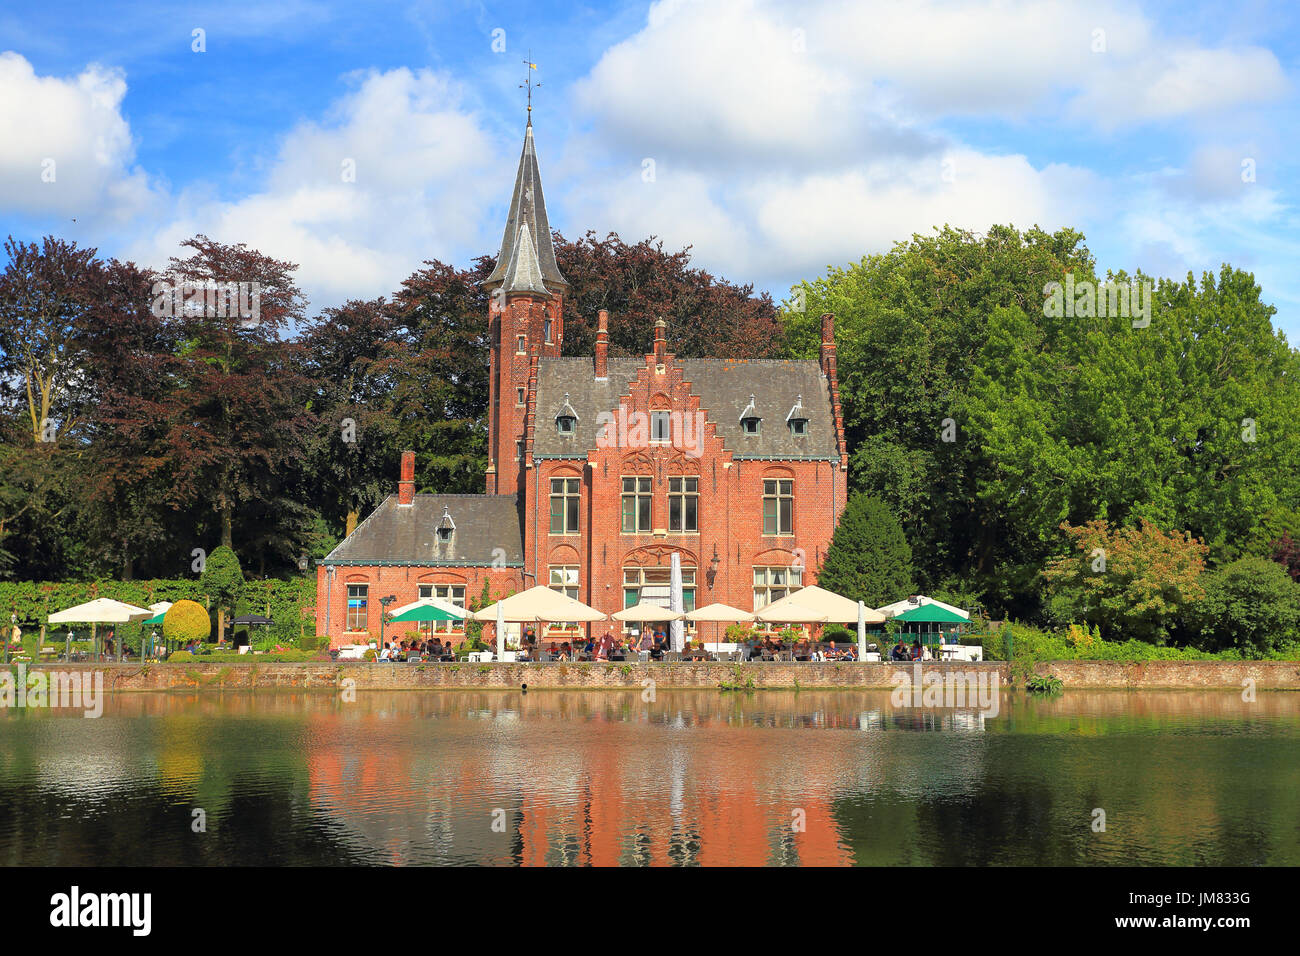 Landmarks of Bruges. Old red brick building with tower on water canal on a sunny summer day. Stock Photo